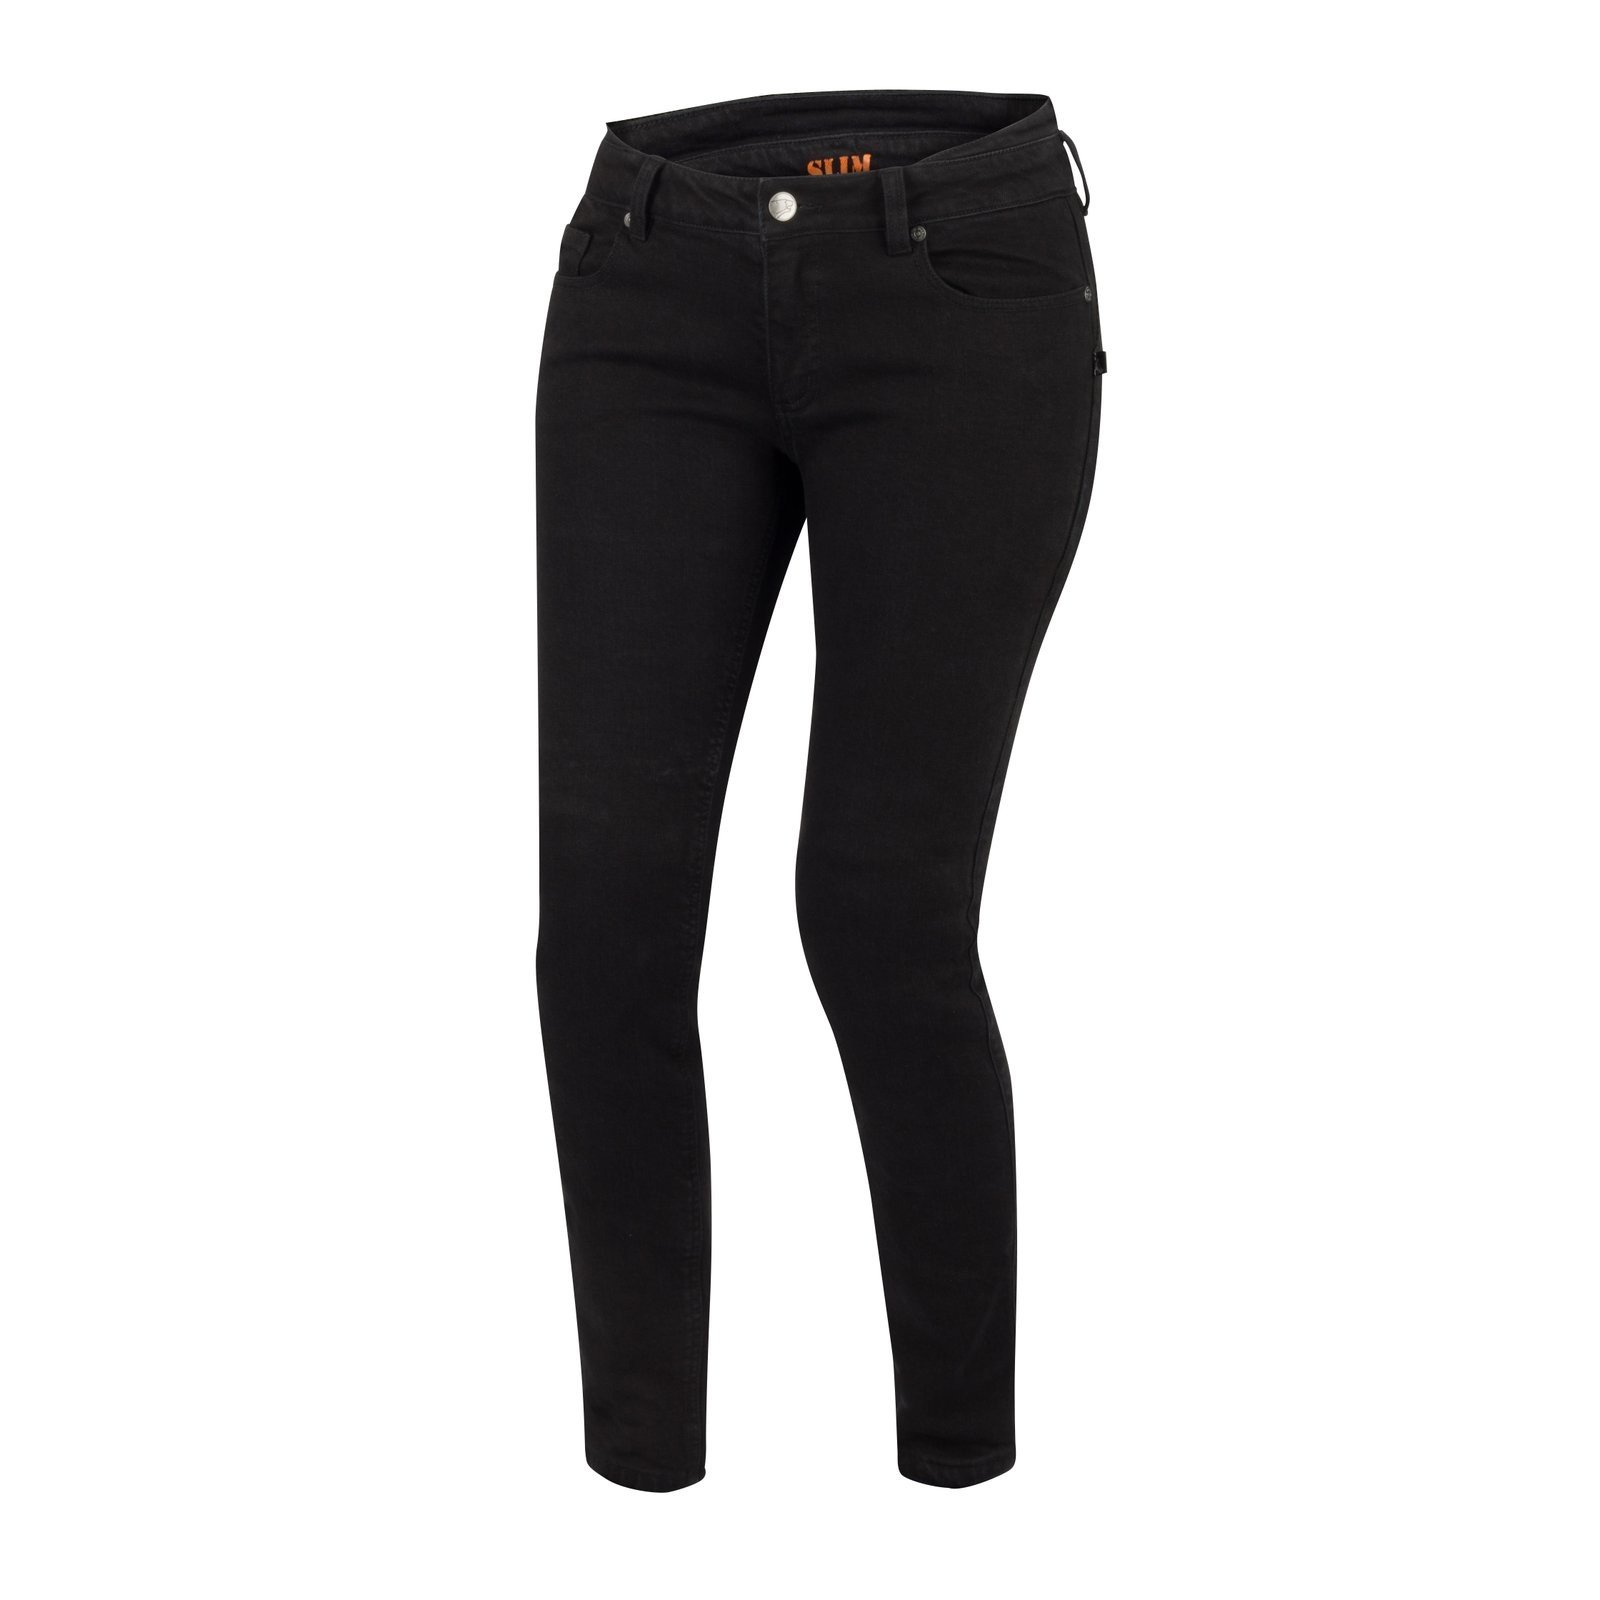 Image of Bering Patricia Lady Black Pants Size T1 ID 3660815157169